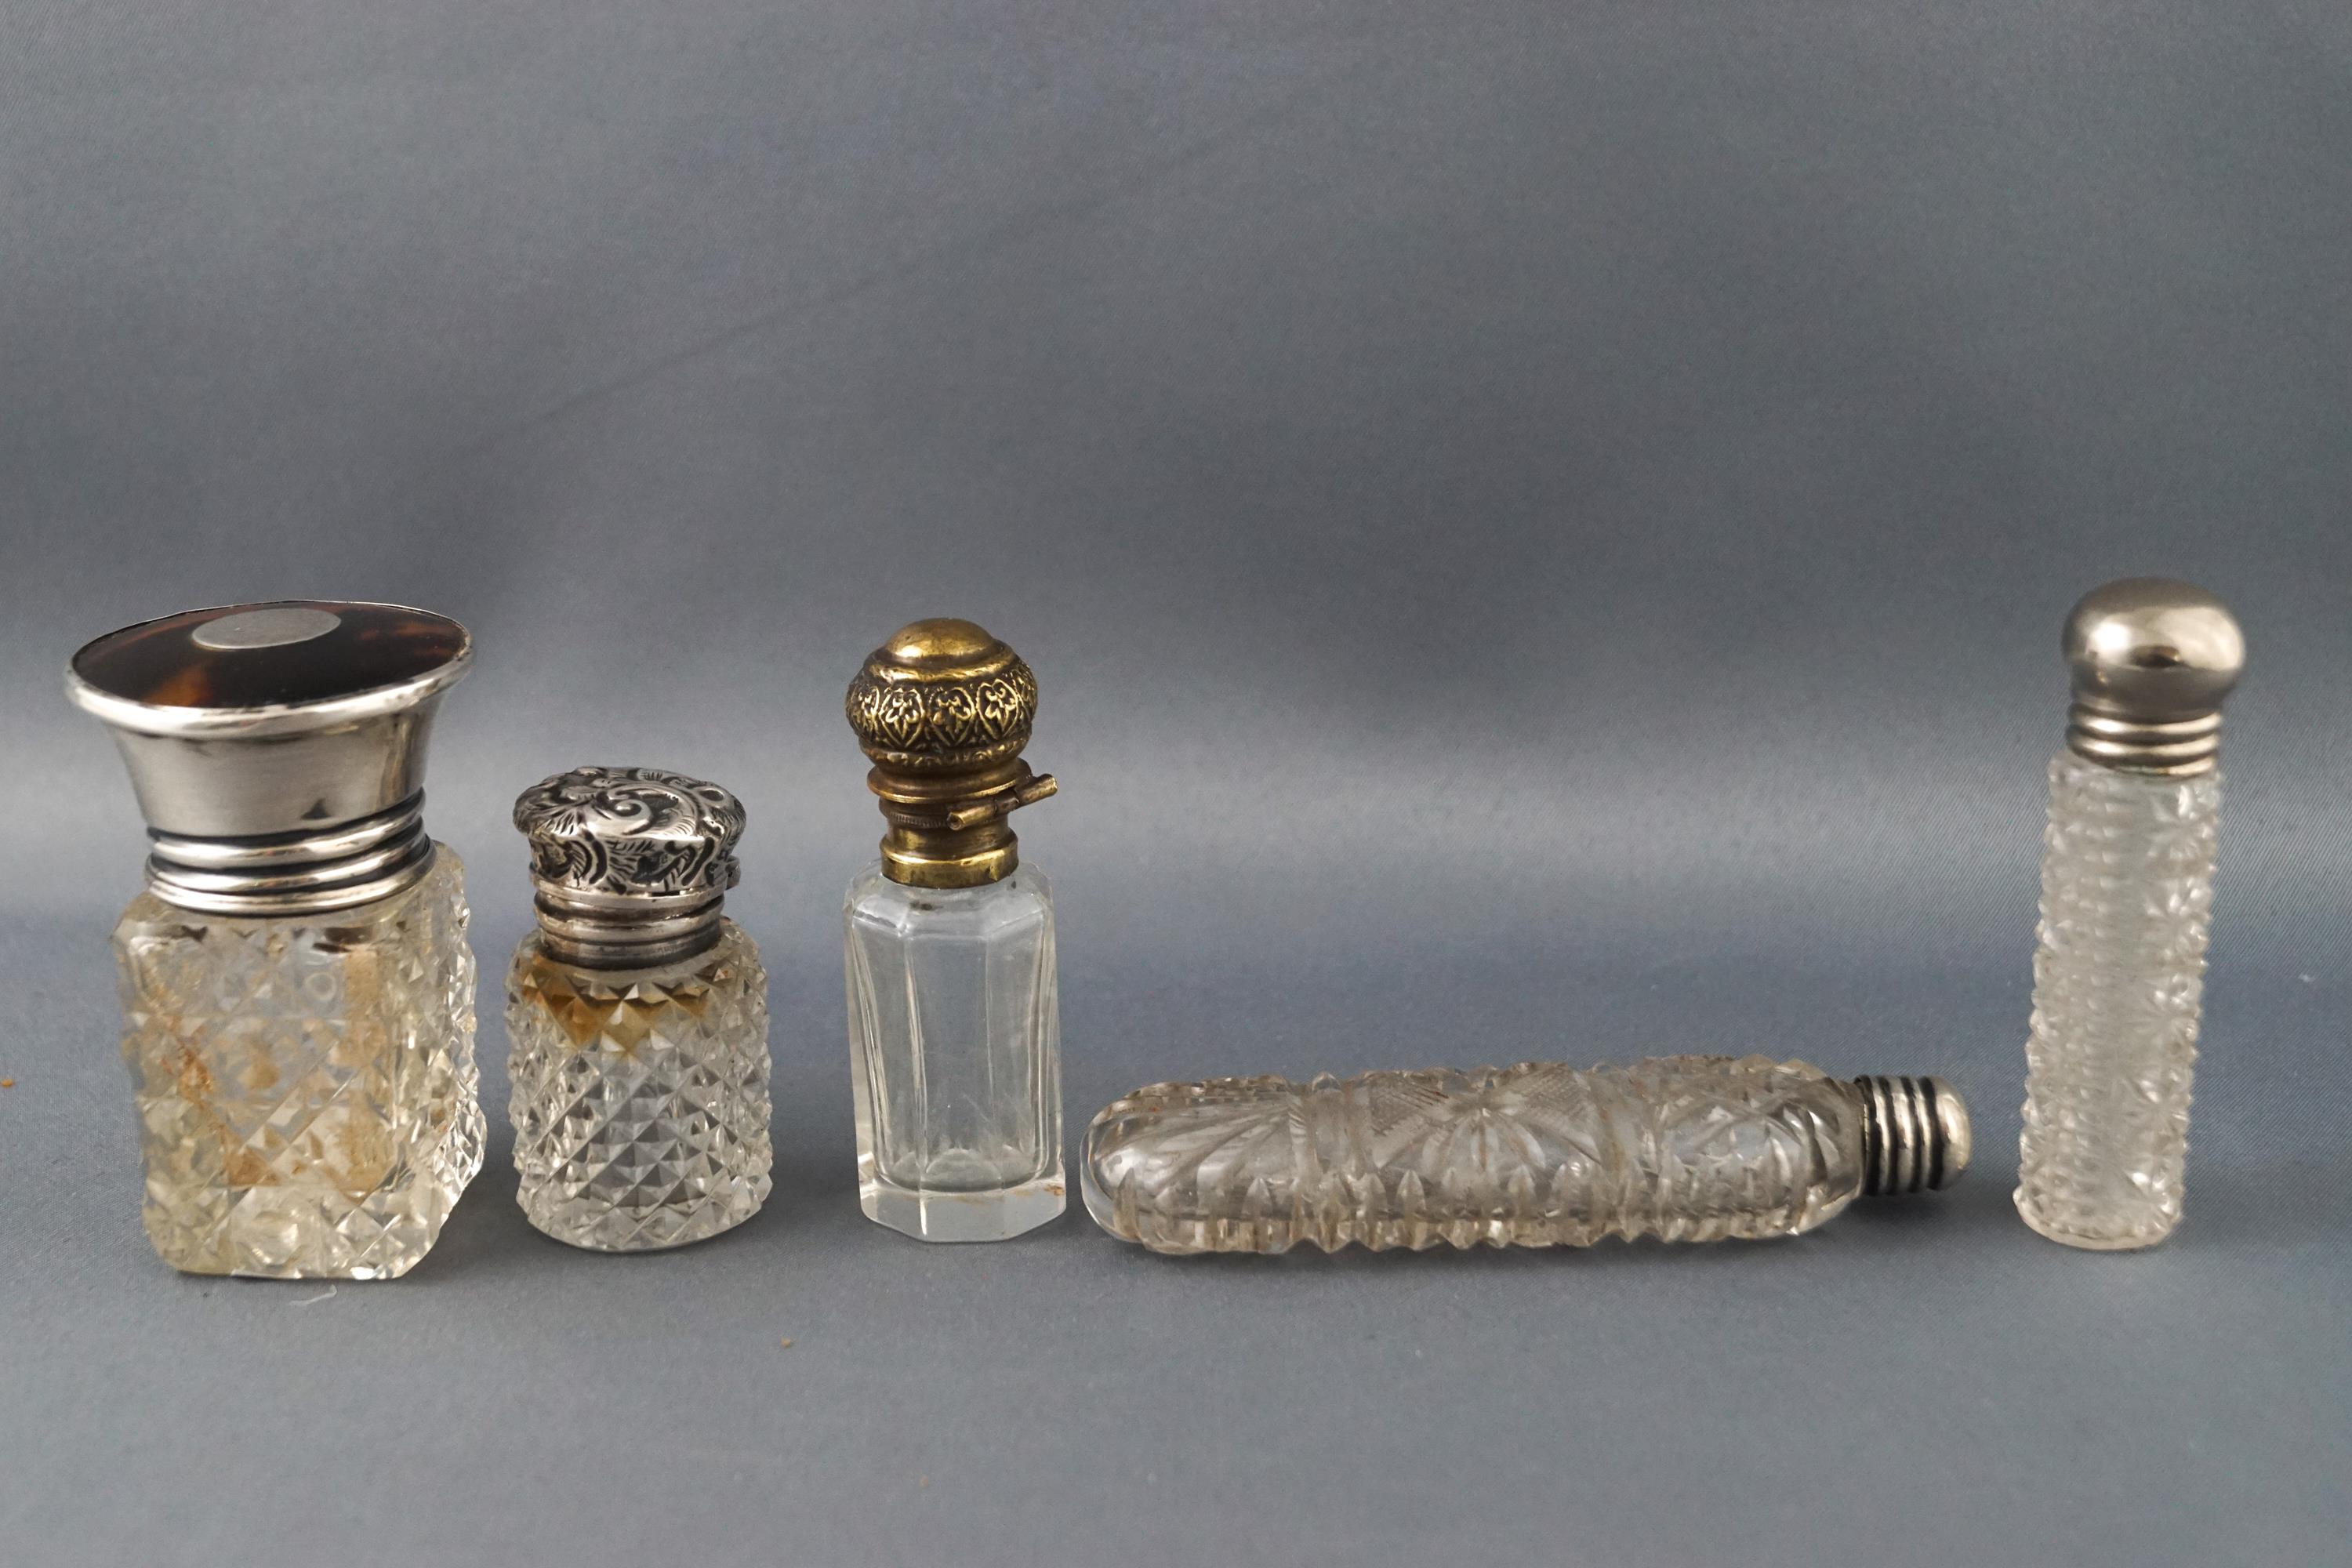 A cut glass scent bottle with a silver and tortoiseshell lid,